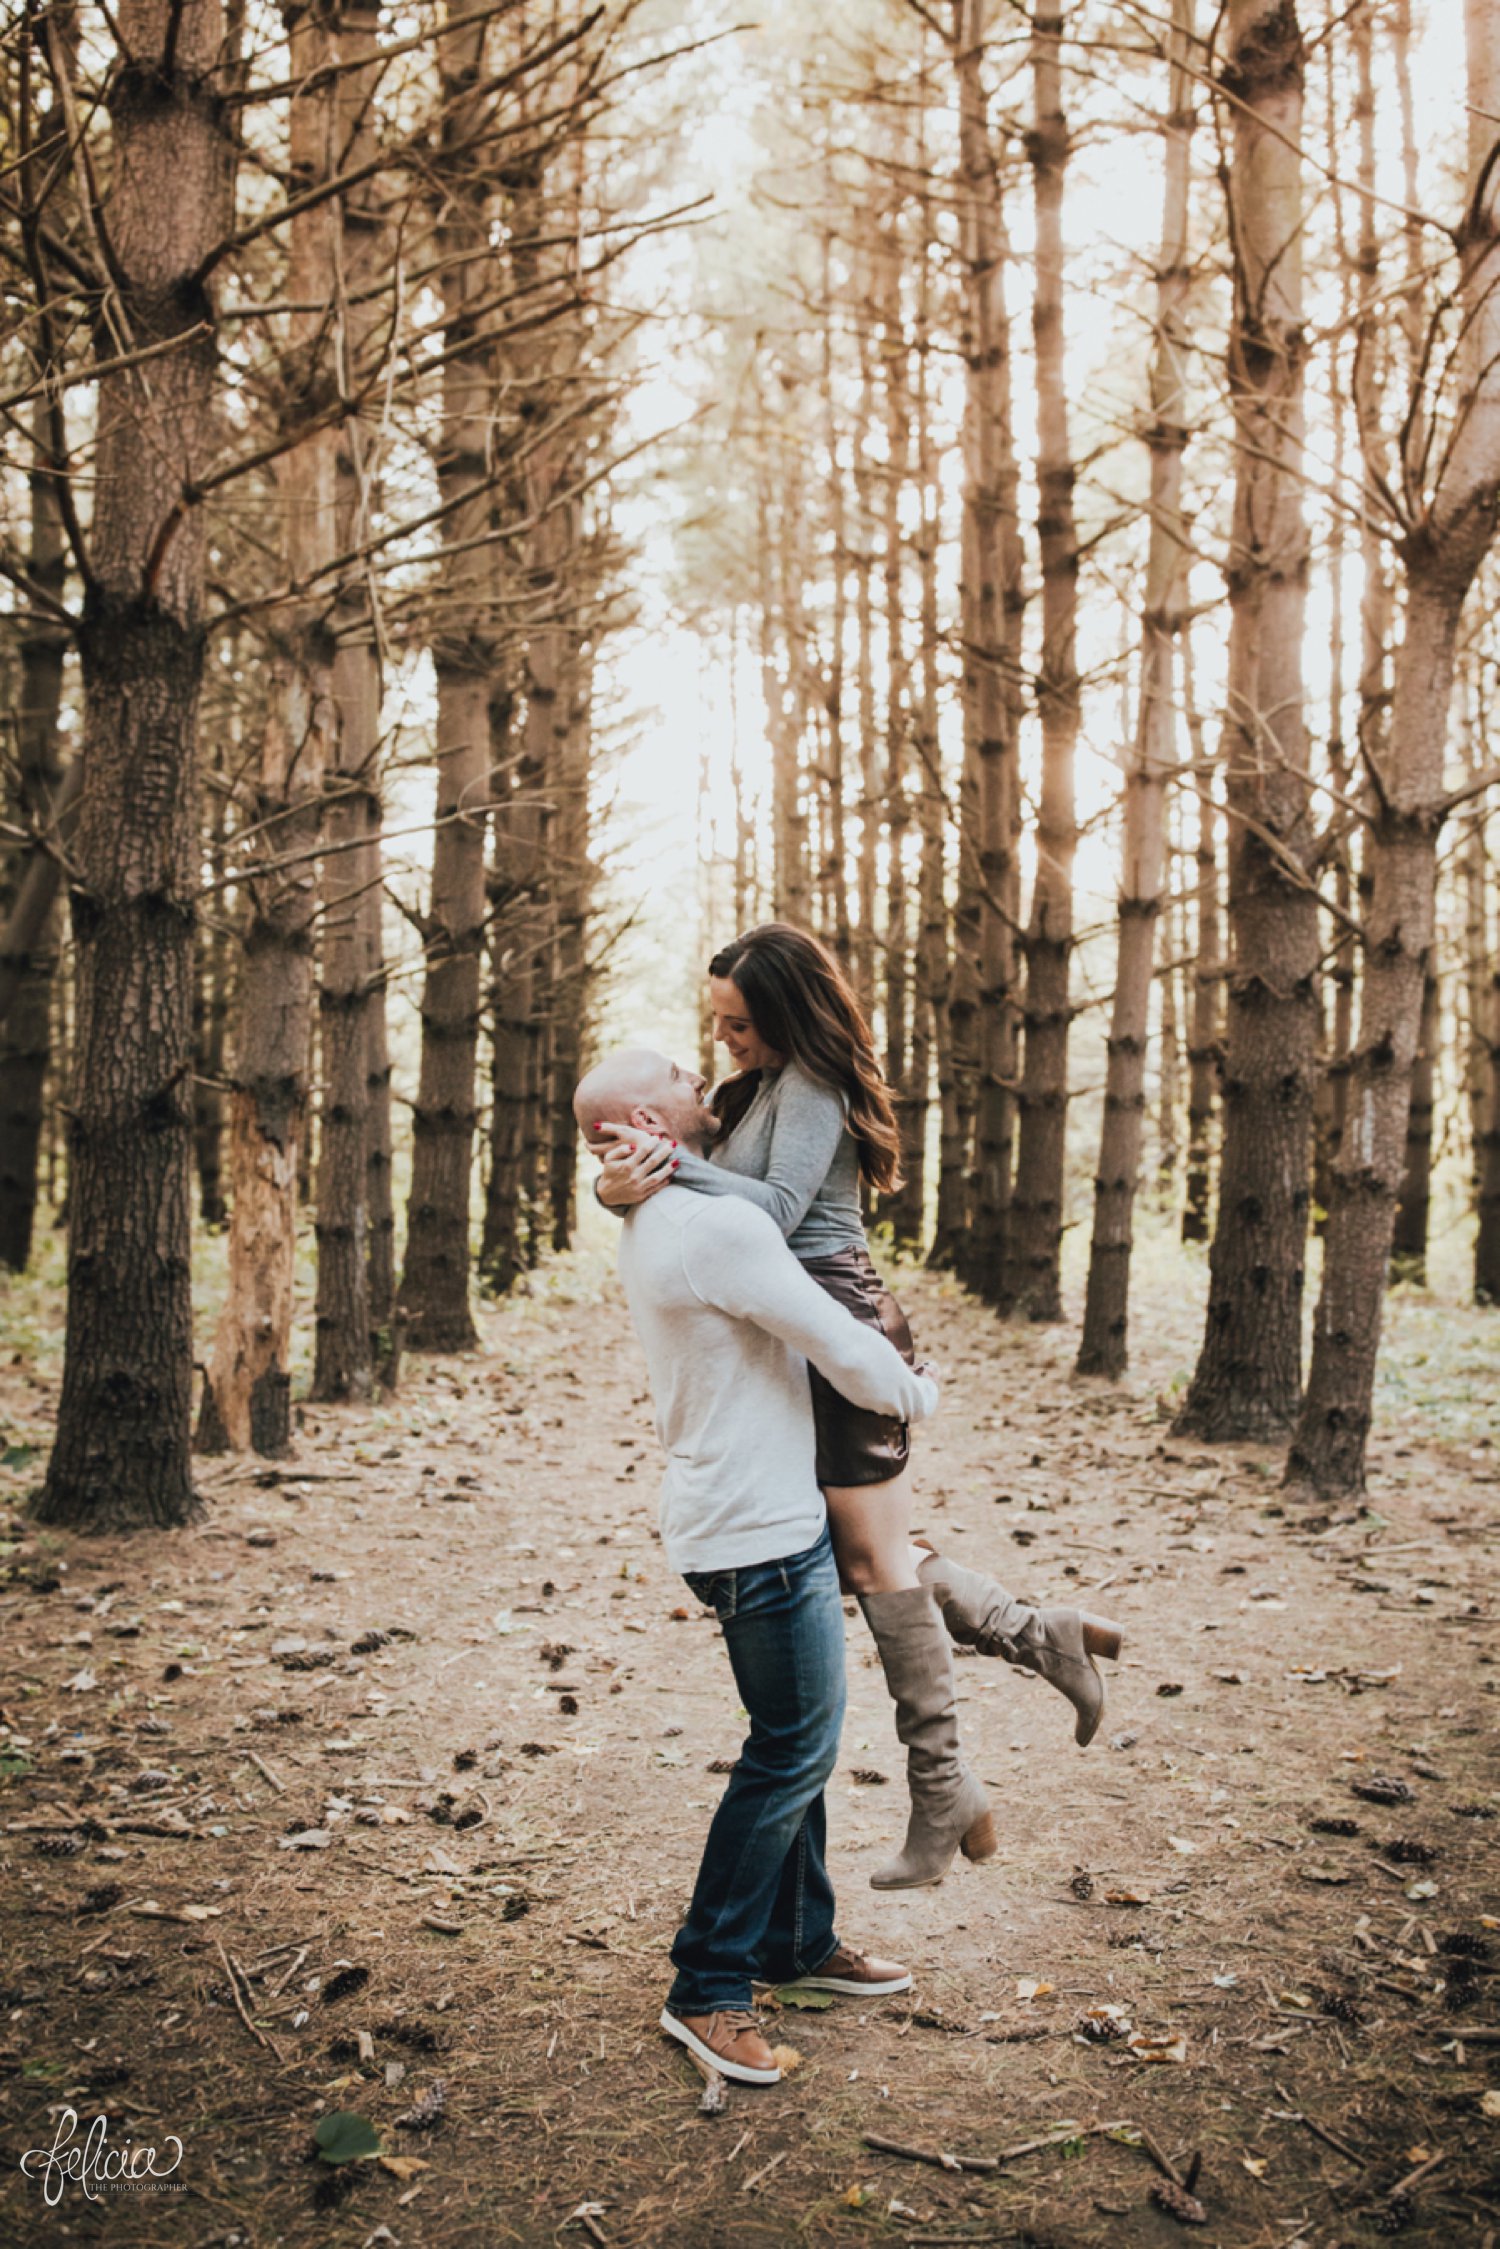 images by feliciathephotographer.com | destination wedding photographer | family portraits | fall attire | autumn | woodland setting | forest | casual | jeans | corduroy | sparkly boots | fur vest | toddlers | hipster | playful | parents and kiddos | father mother | lumber | kiss | couple | 